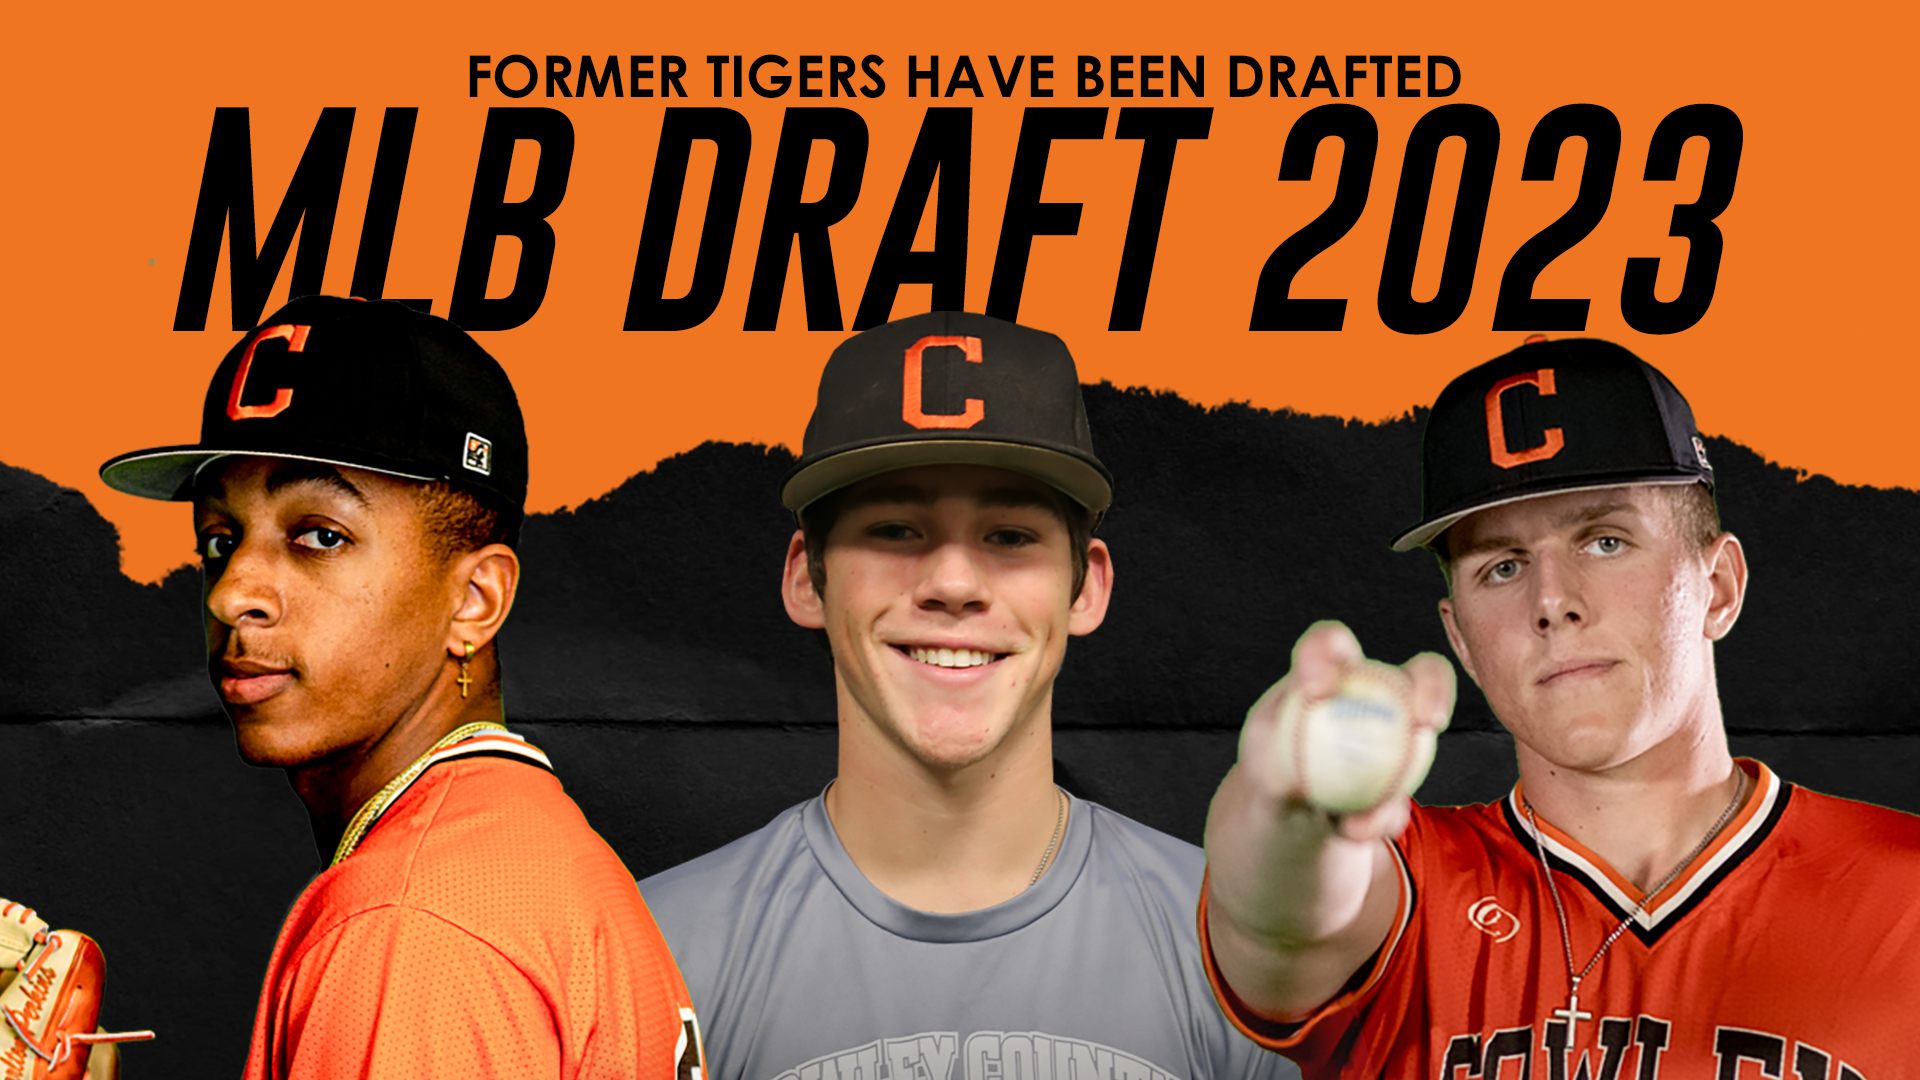 Trio of former Tigers selected in MLB draft